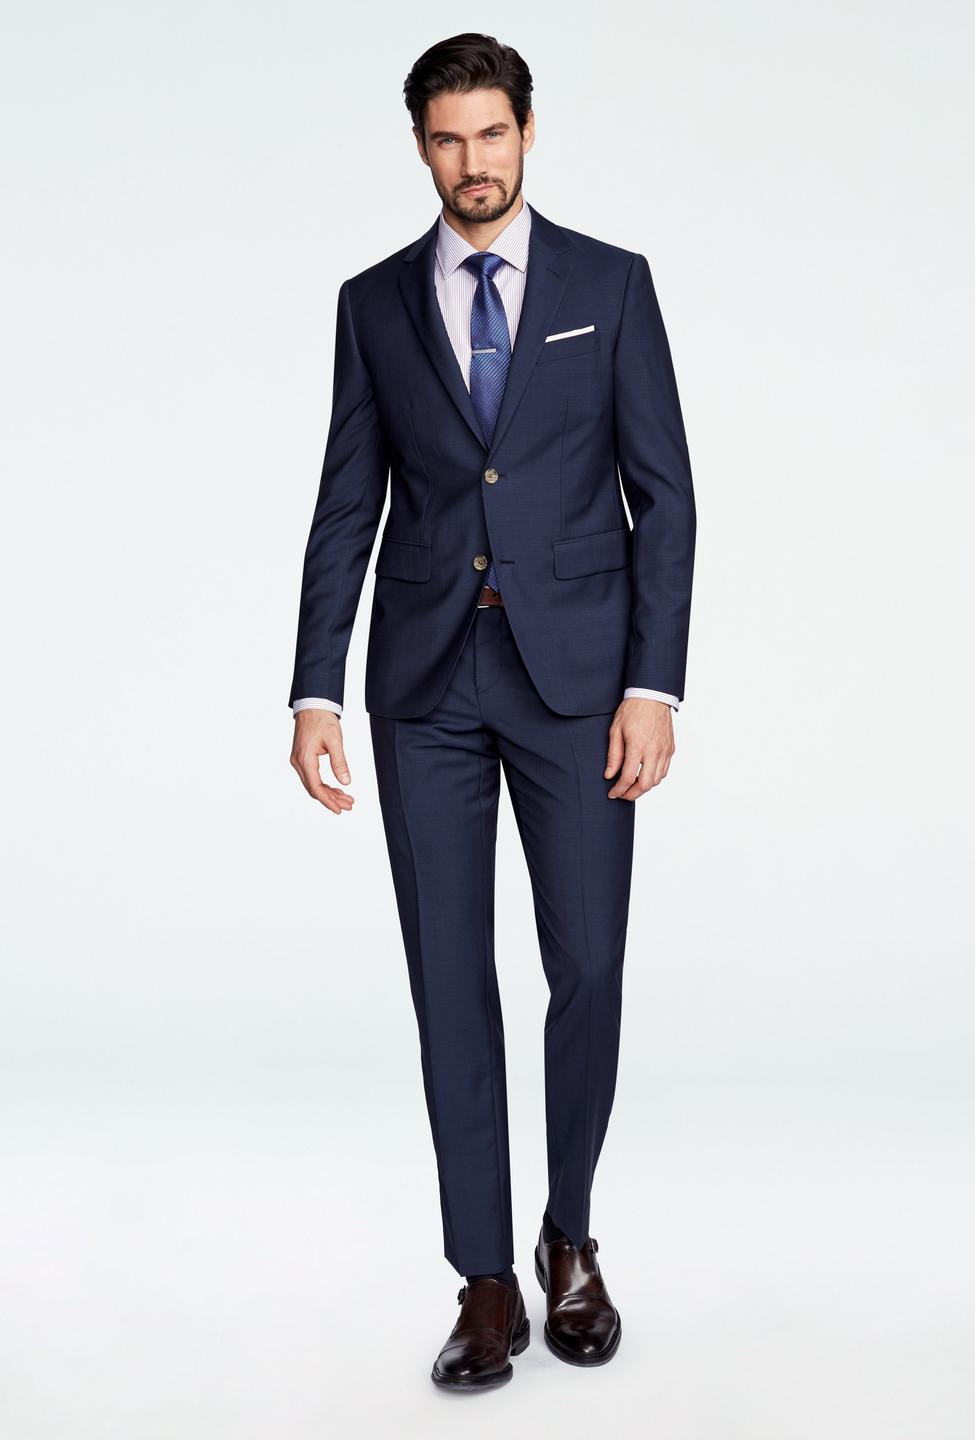 Blue suit - Hamilton Solid Design from Luxury Indochino Collection